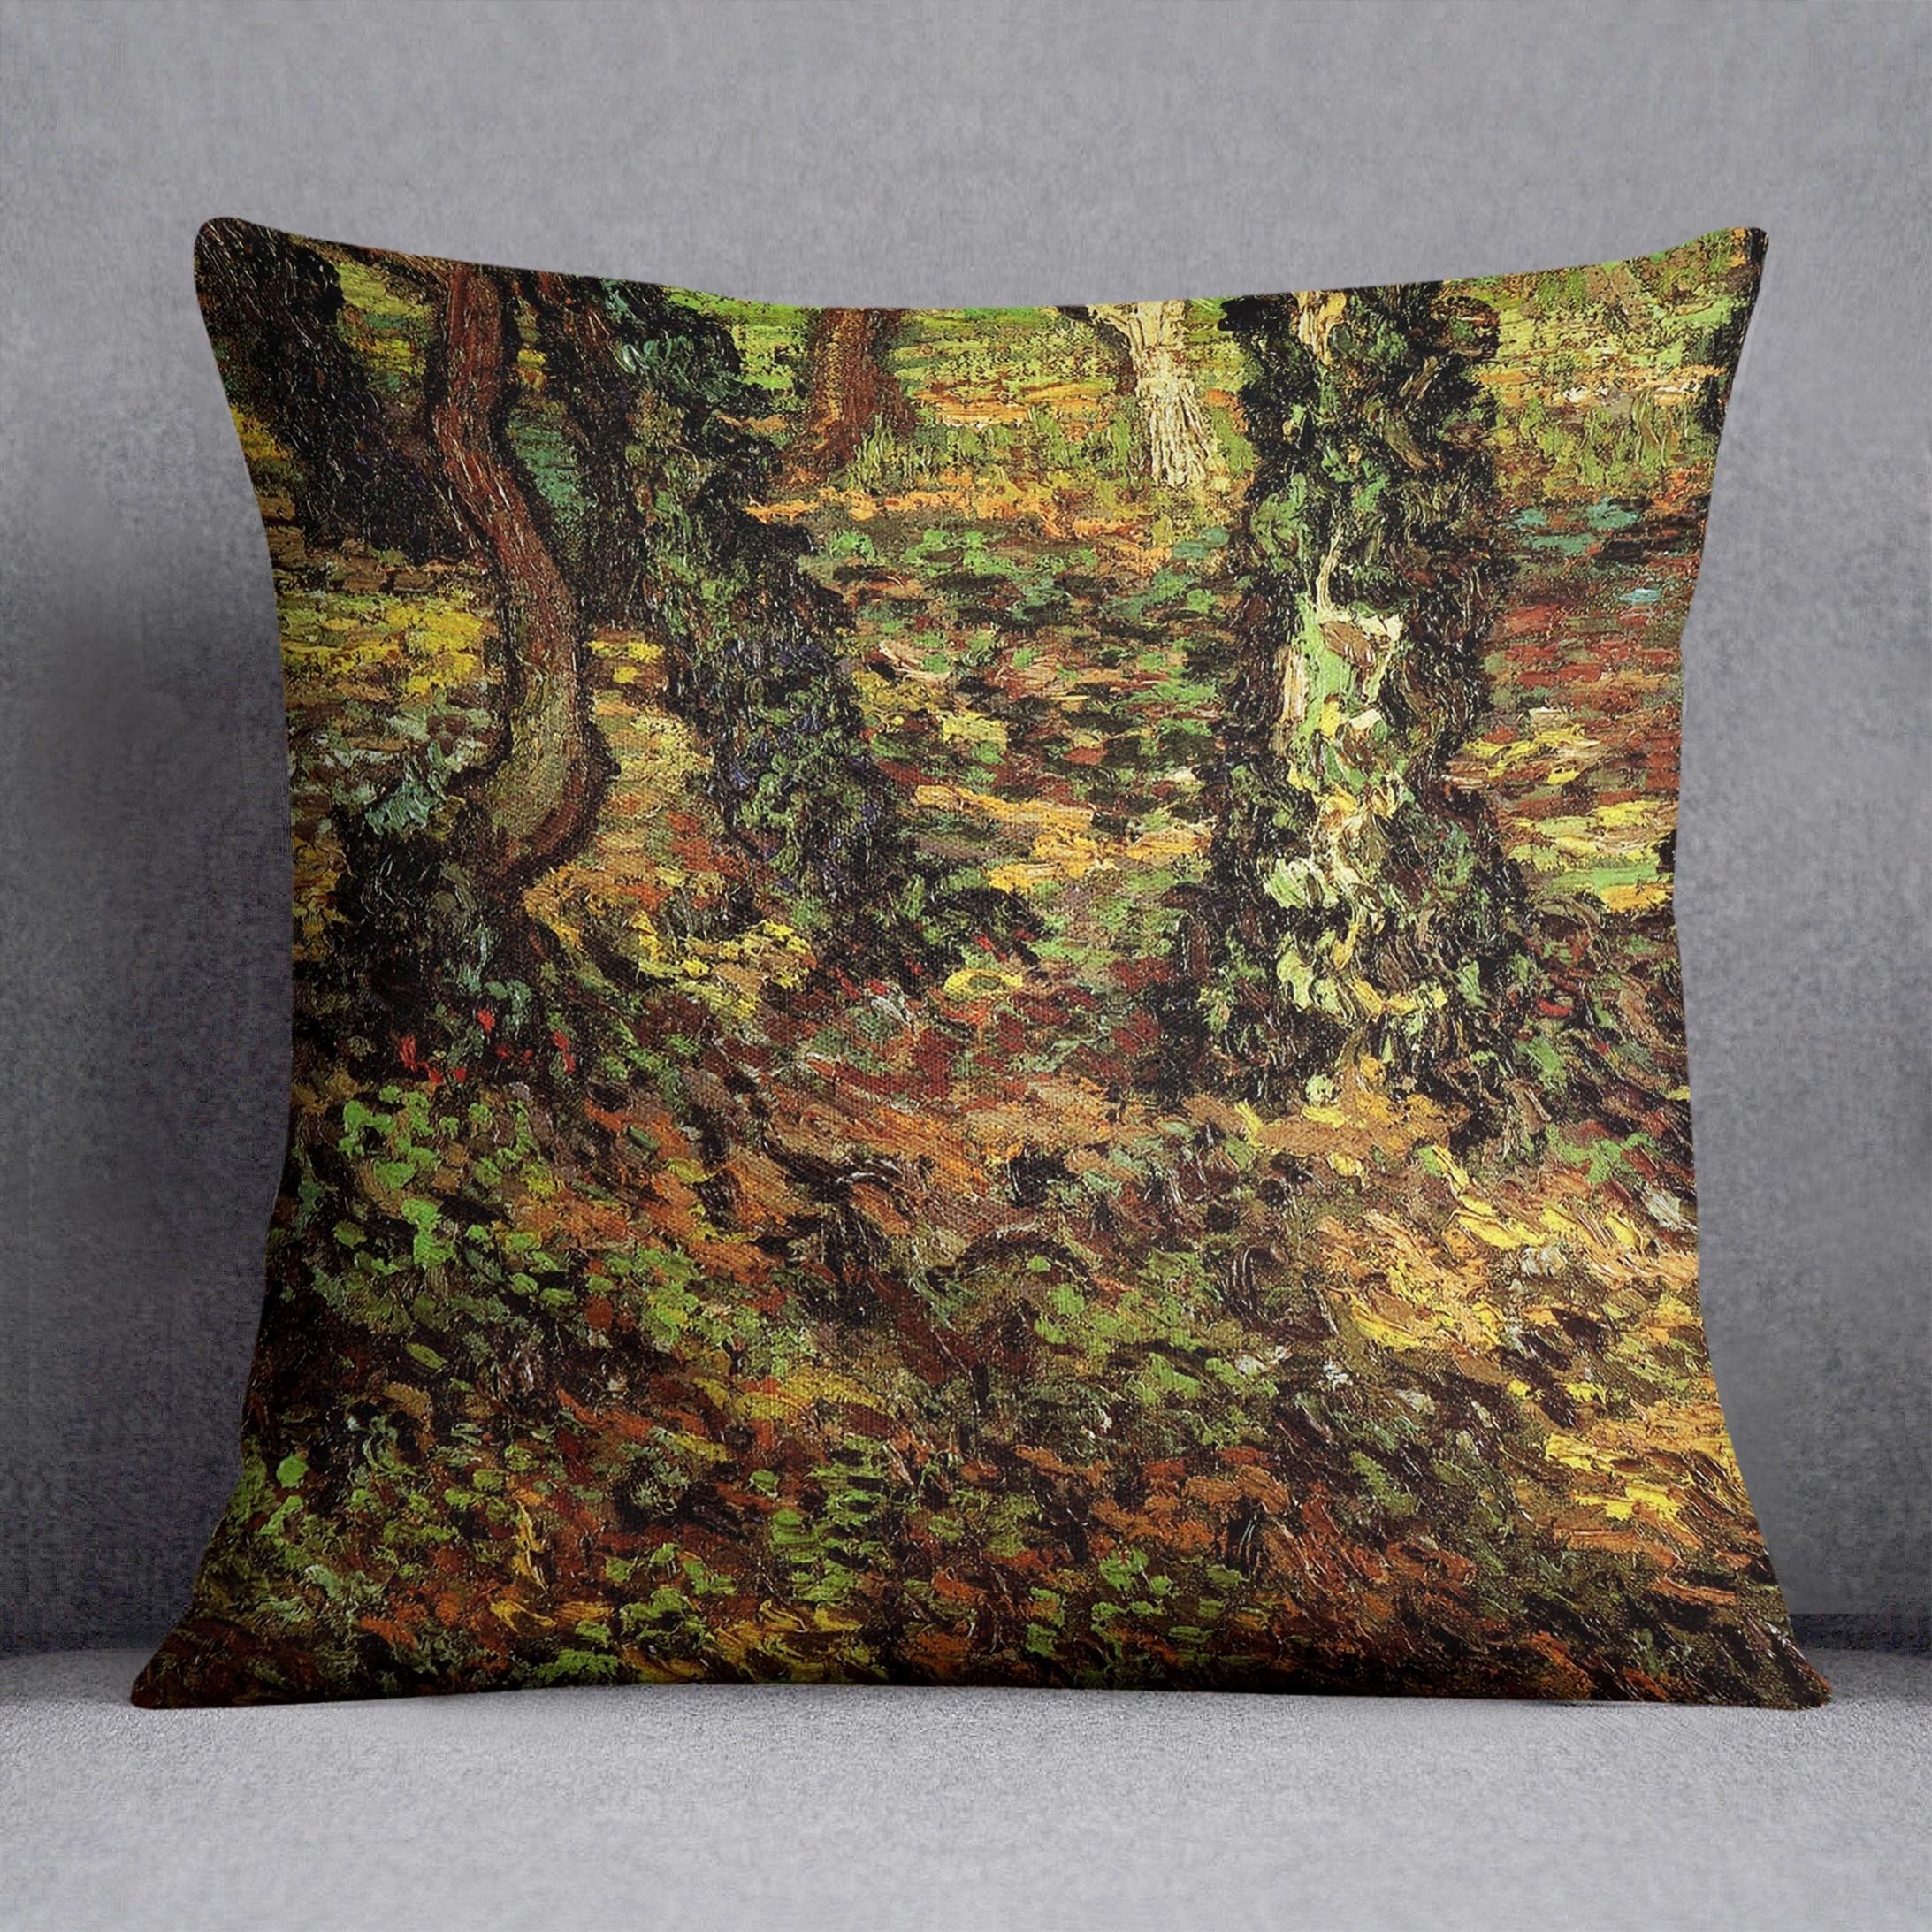 Tree Trunks with Ivy by Van Gogh Throw Pillow